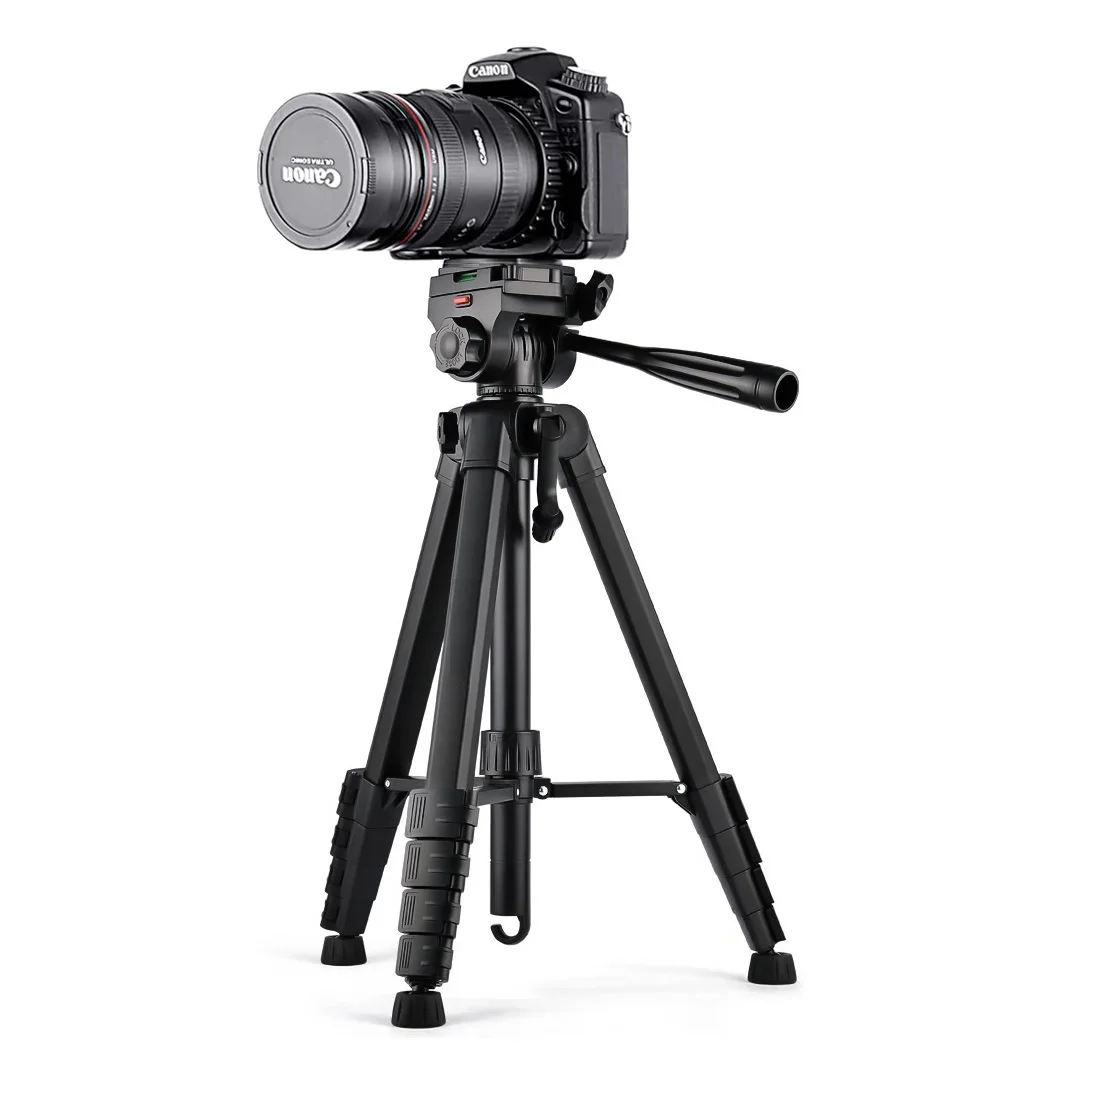 

175cm/68.9in Adjustable-height Professional DSLR Camera Tripod for Nikon Canon Sony and Video Recording,Phone Photography Stand